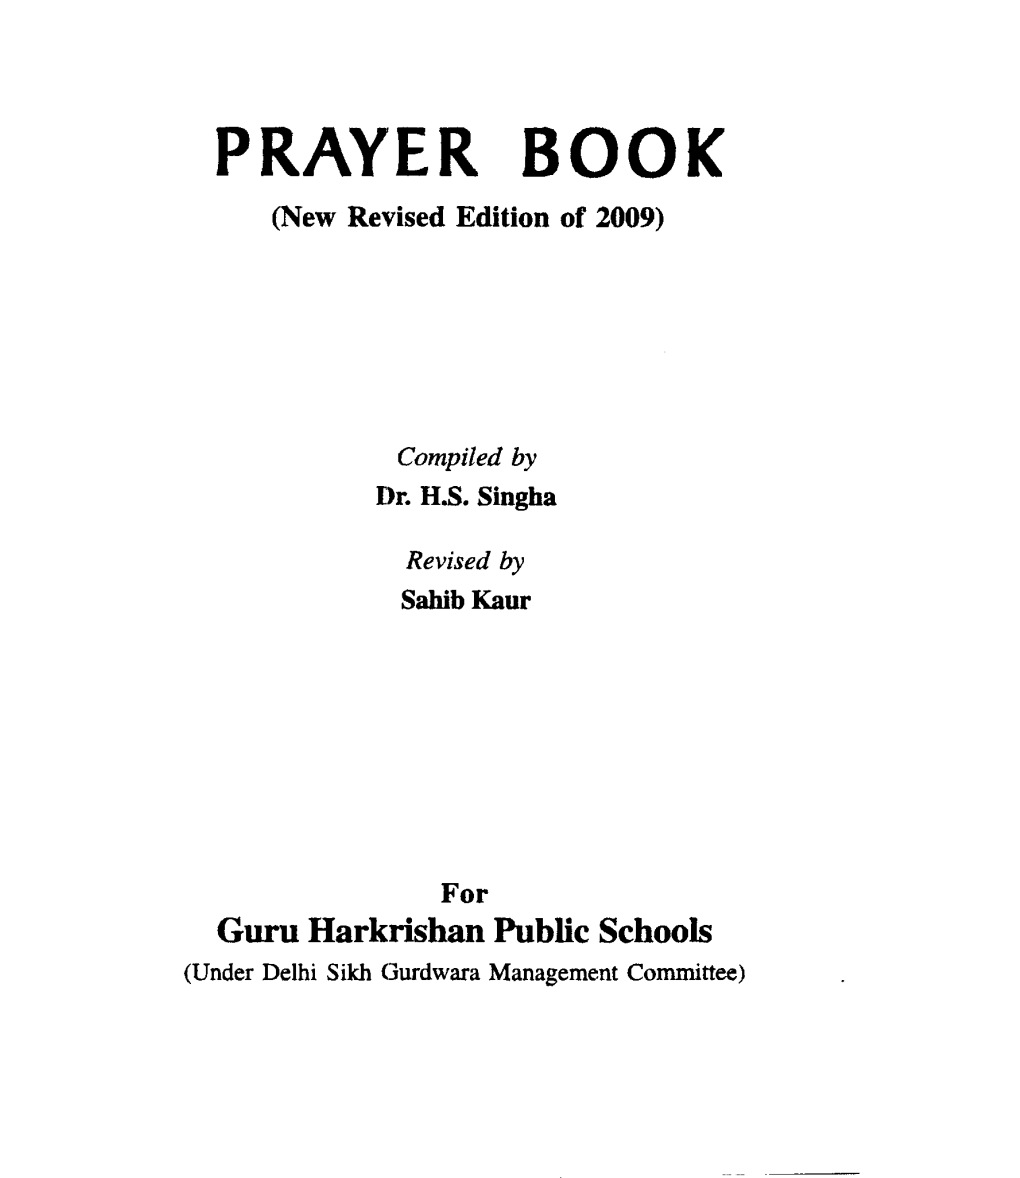 PRAYER BOOK (New Revised Edition of 2009)